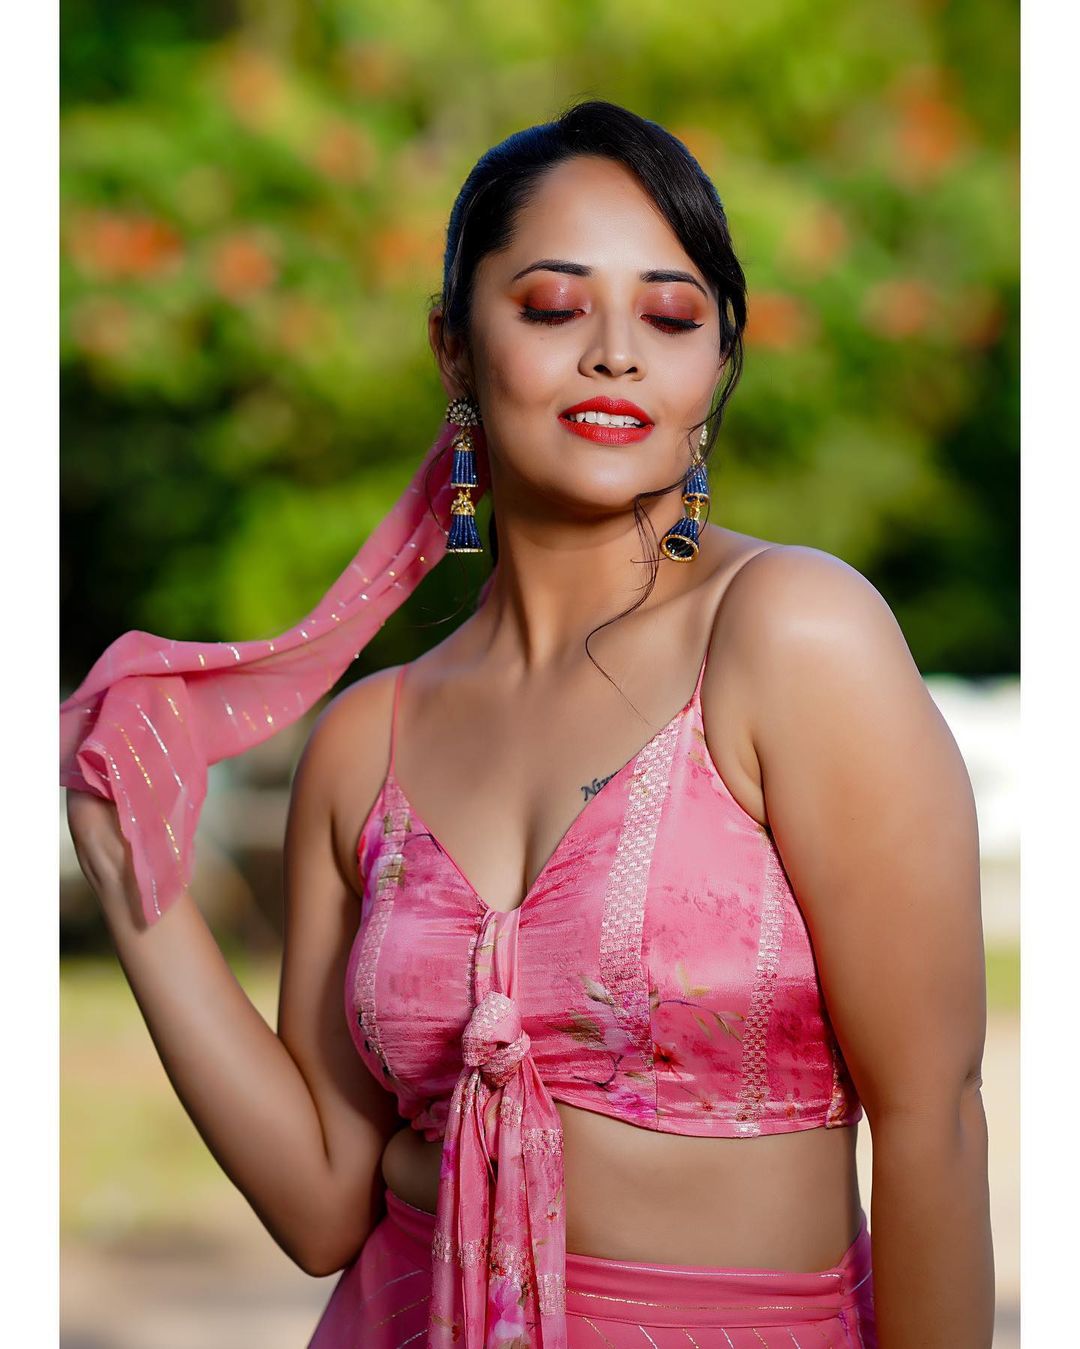 Pic Talk : Anasuya Teases Fans With Her Hot Looks!